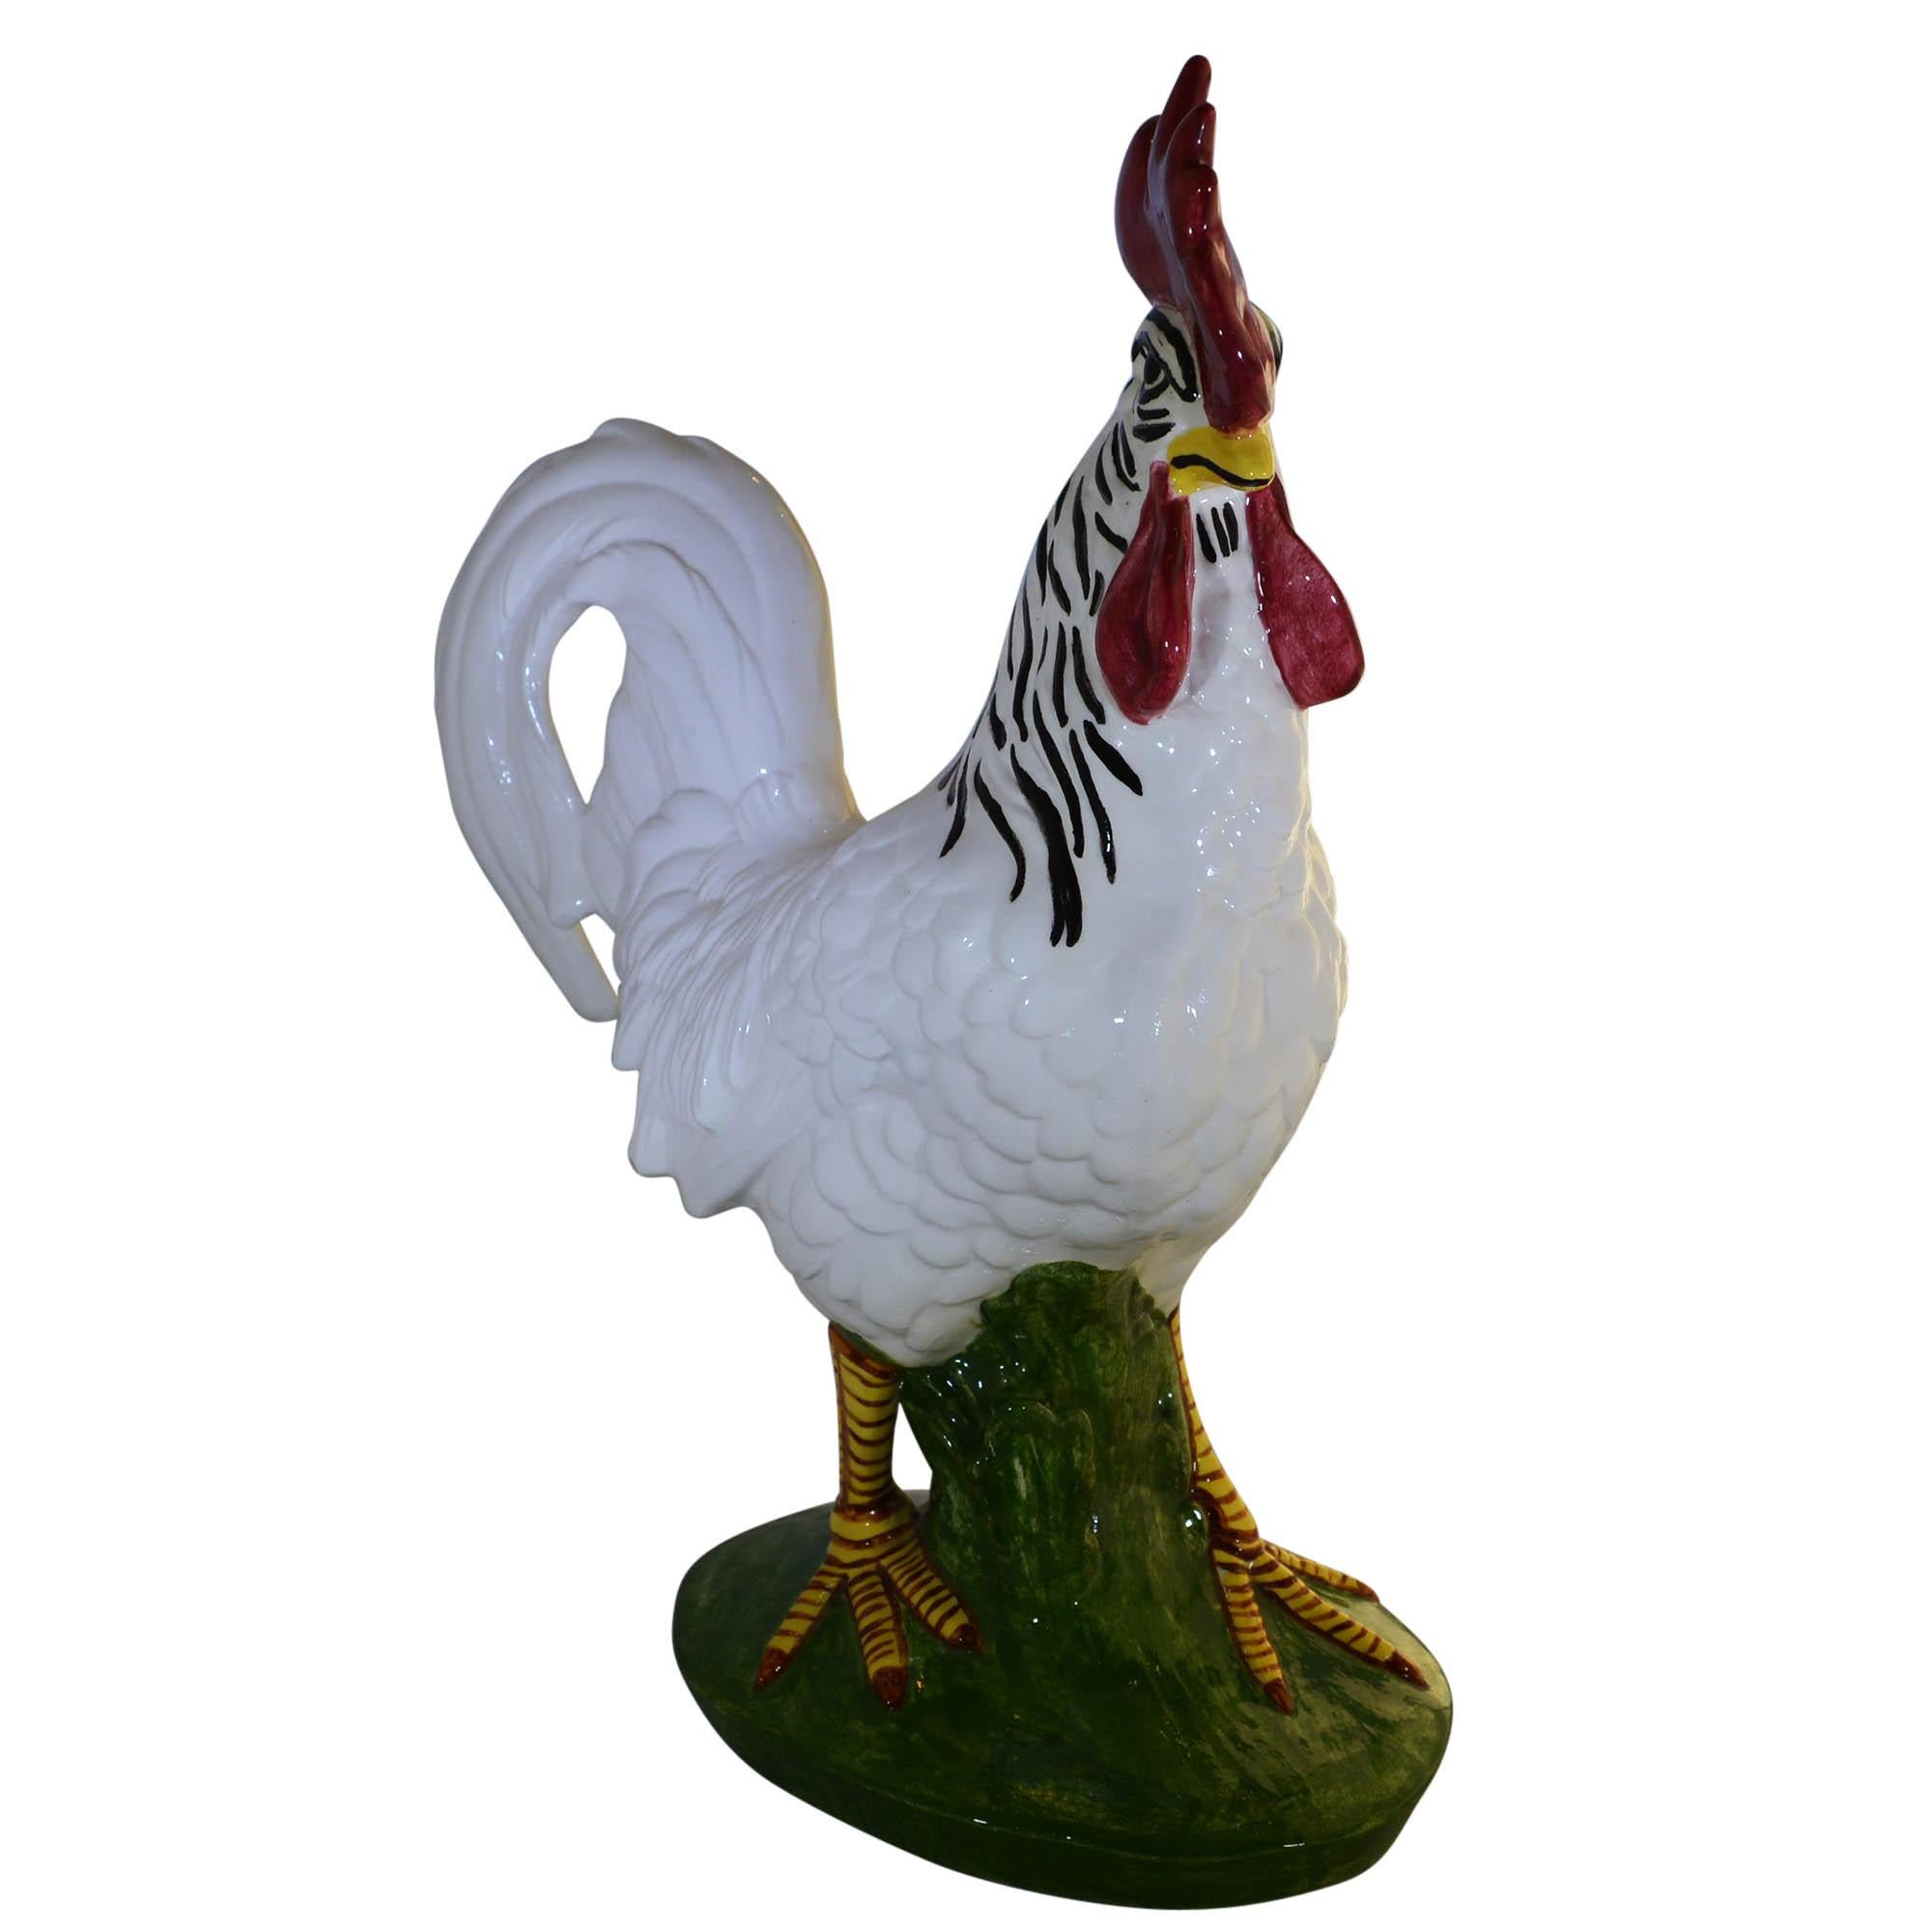 This delightful rooster from Pennsbury Pottery stands proud. Love the way he is giving a stern eye, sending a message to all others that he is the boss. His feet have detailed markings. He is standing in dark green grass.

Pennsbury Pottery was